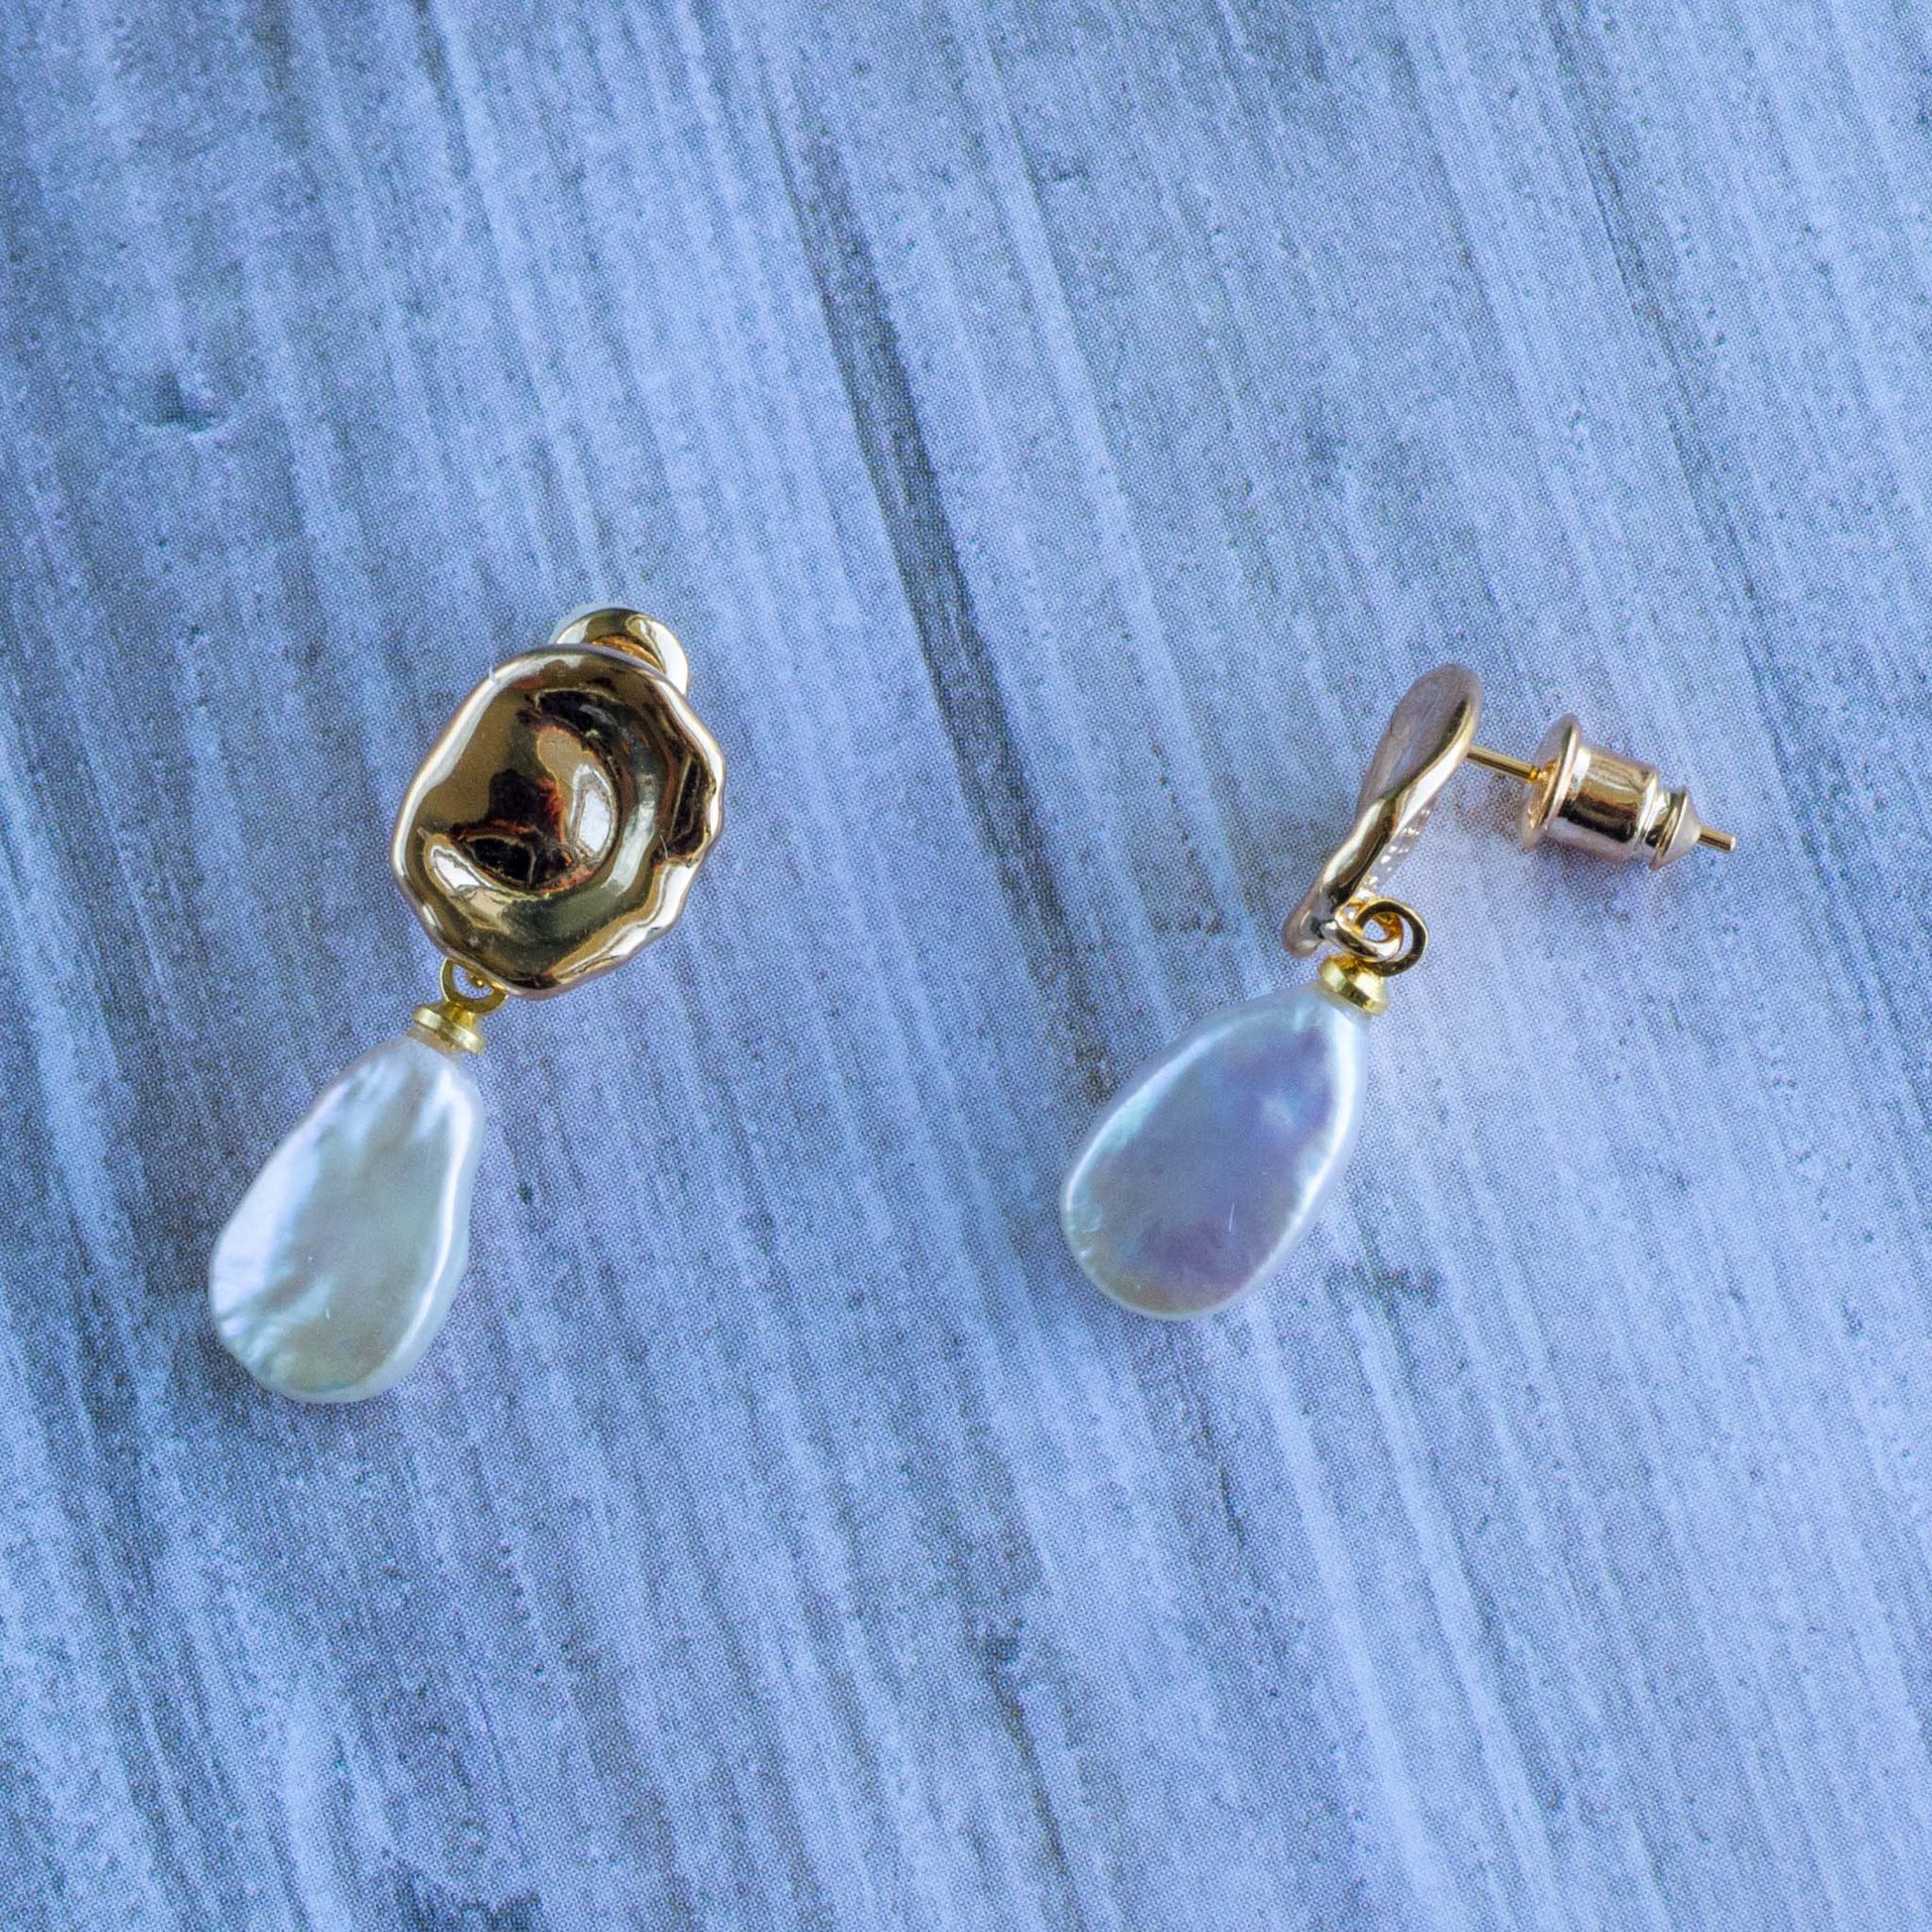 Arbor Trading Post Earrings Handcrafted Freshwater Baroque Pearl Gold Disc Drop Earrings